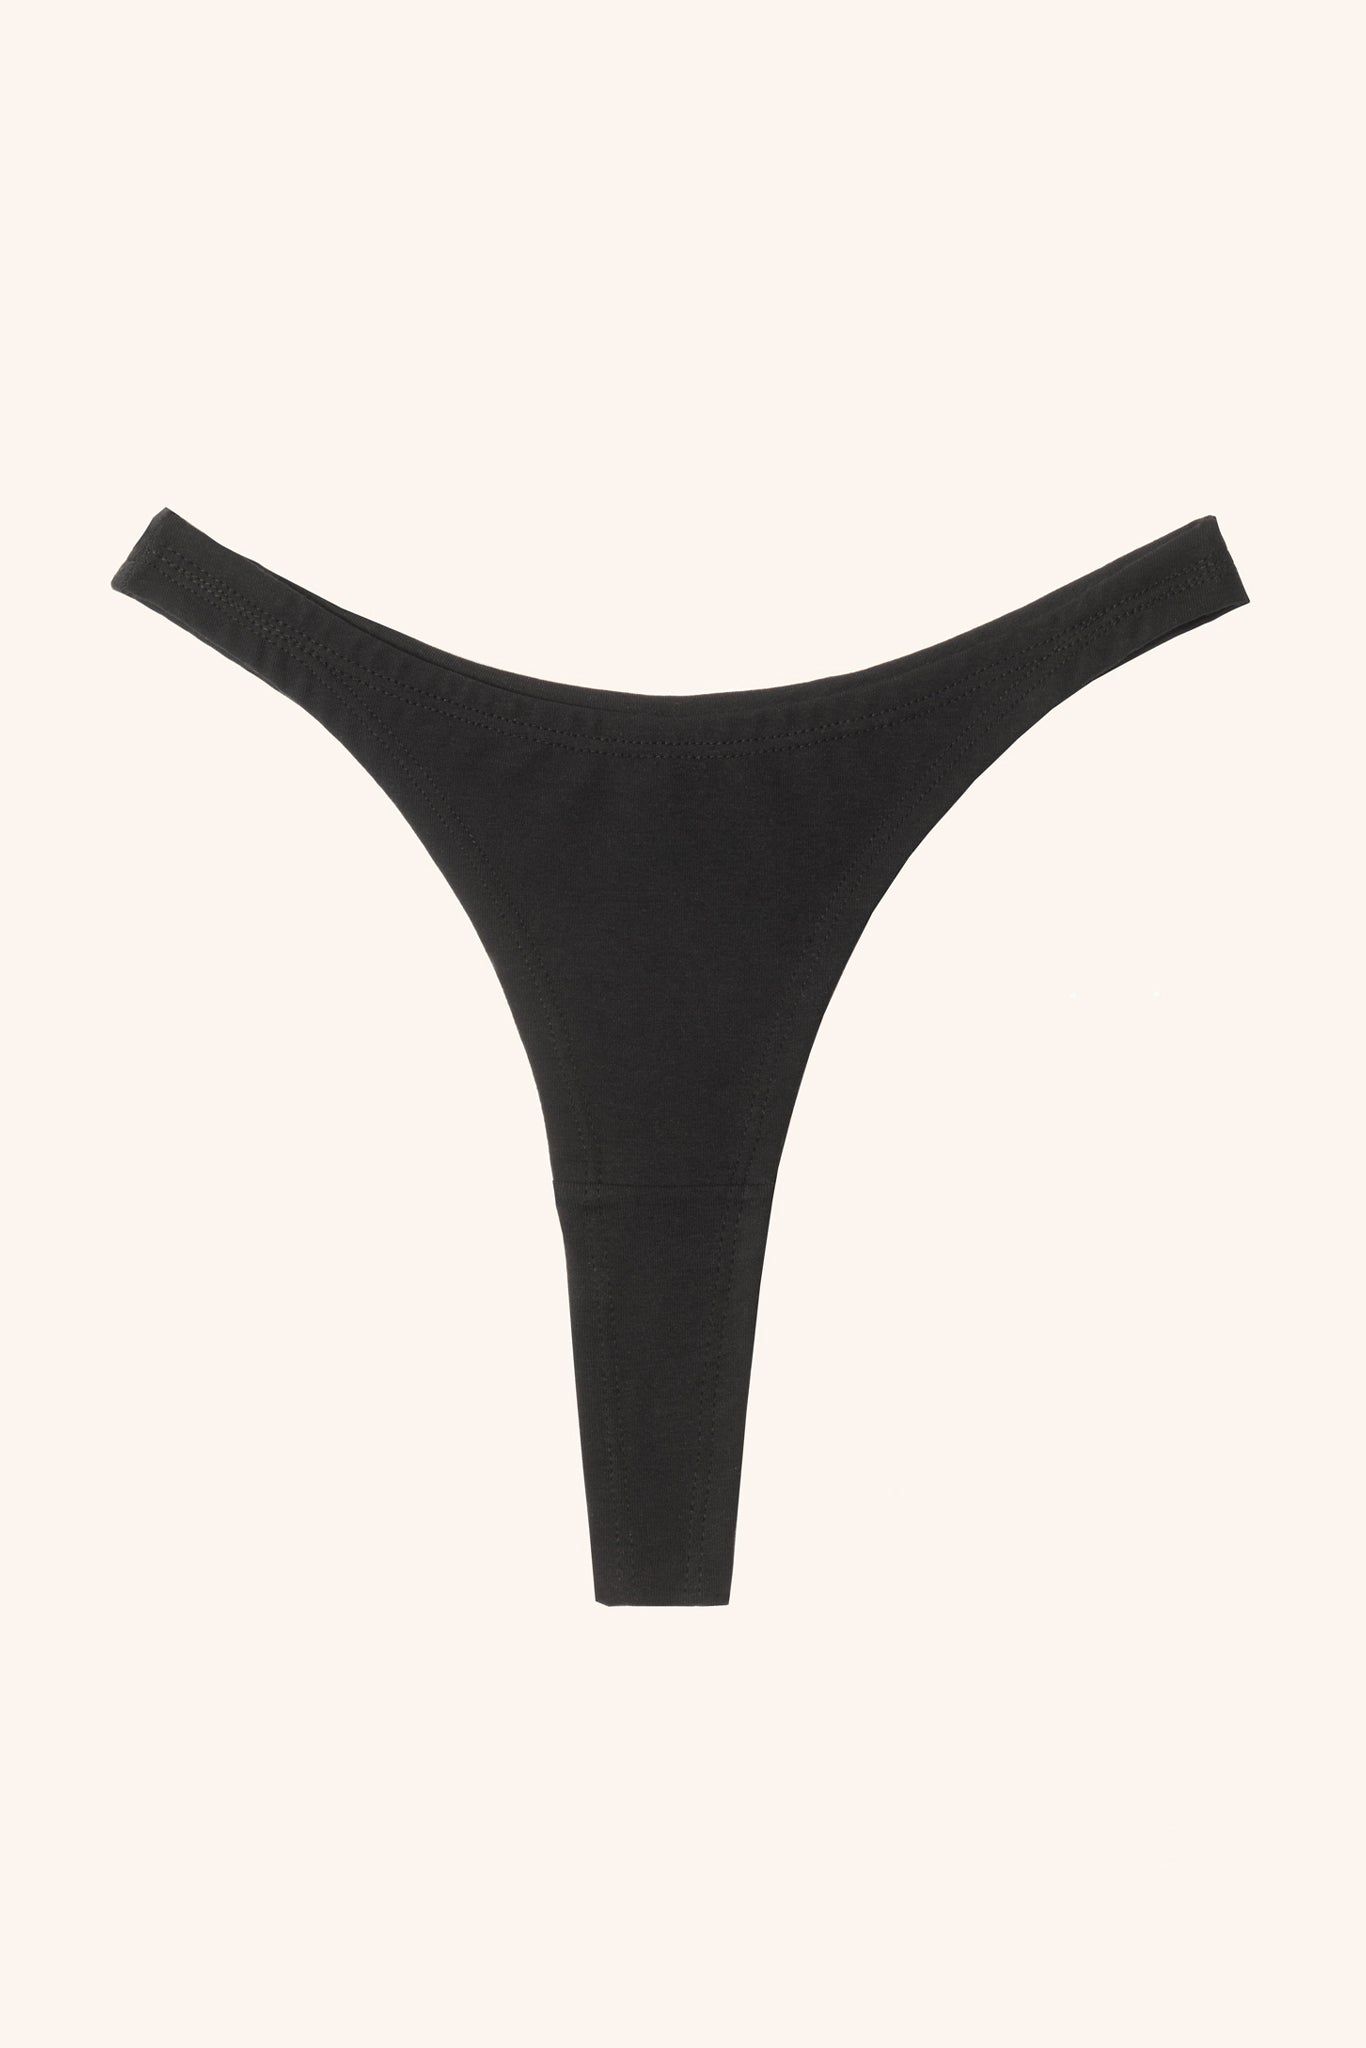 Cheap Cotton G-string Panties Comfortable Casual T Back Low Waist